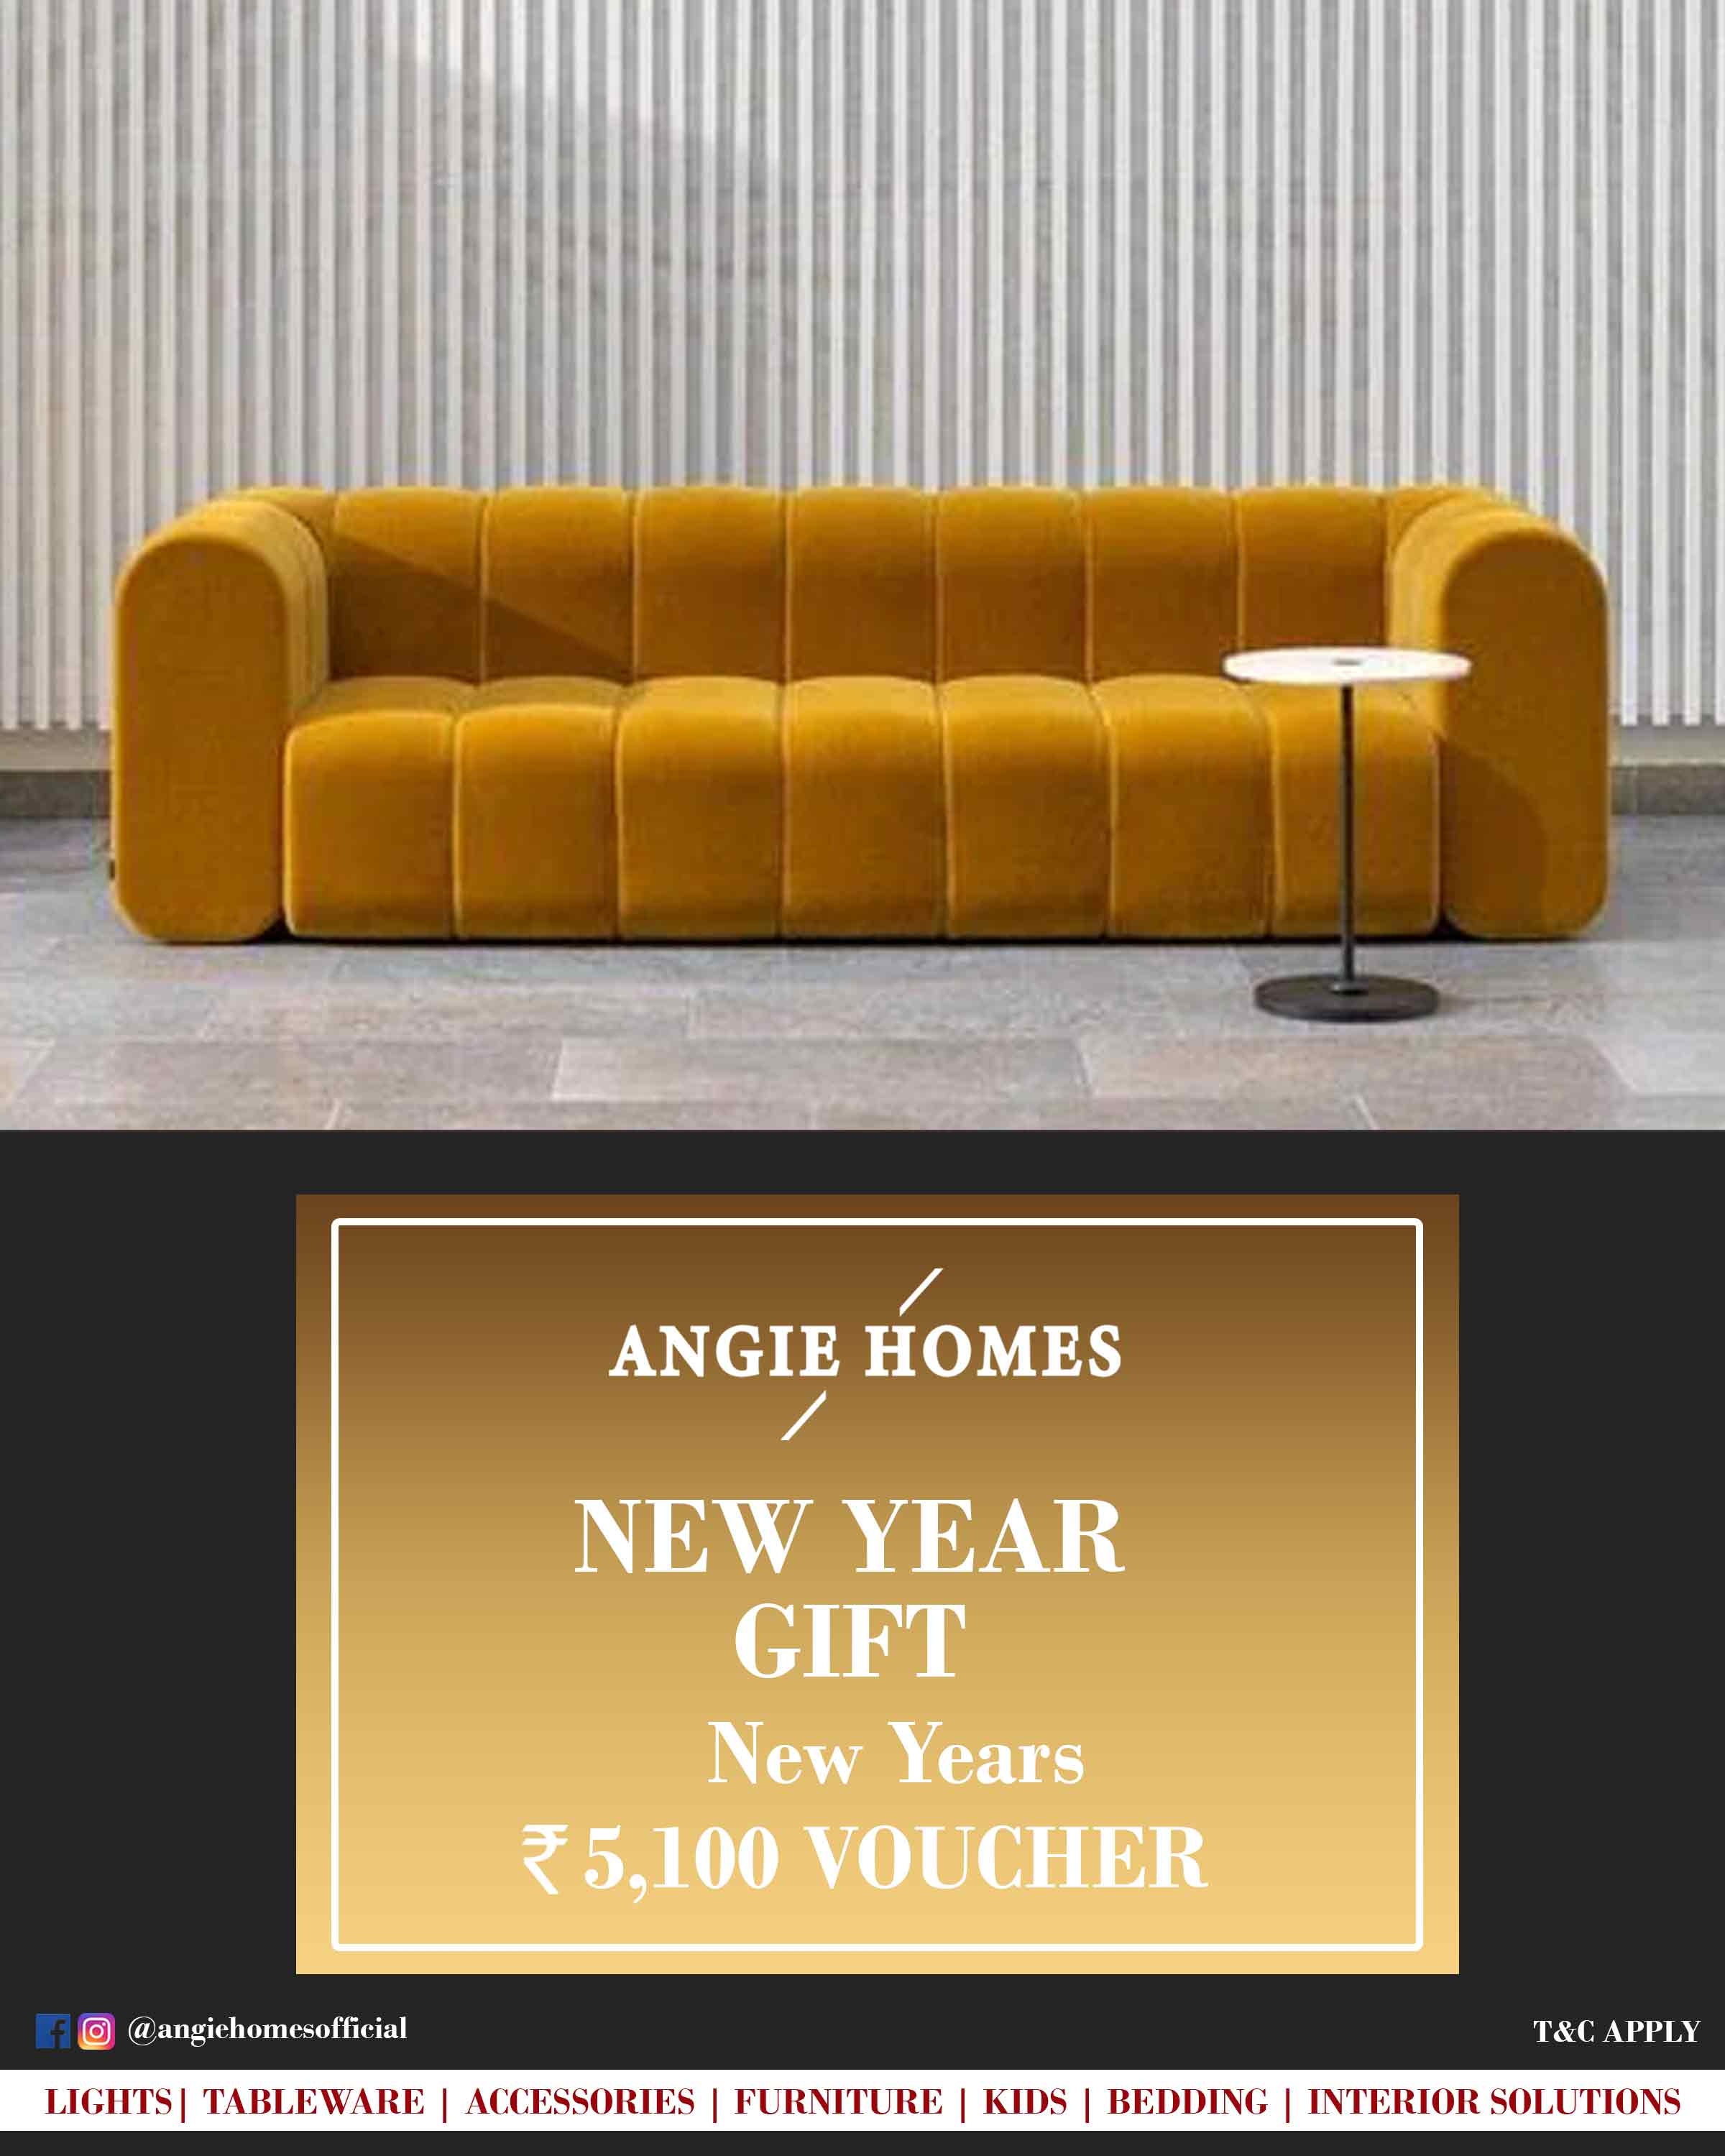 Online New Year Gift Voucher for Yellow 3-Seater Sofa | Furniture ANGIE HOMES